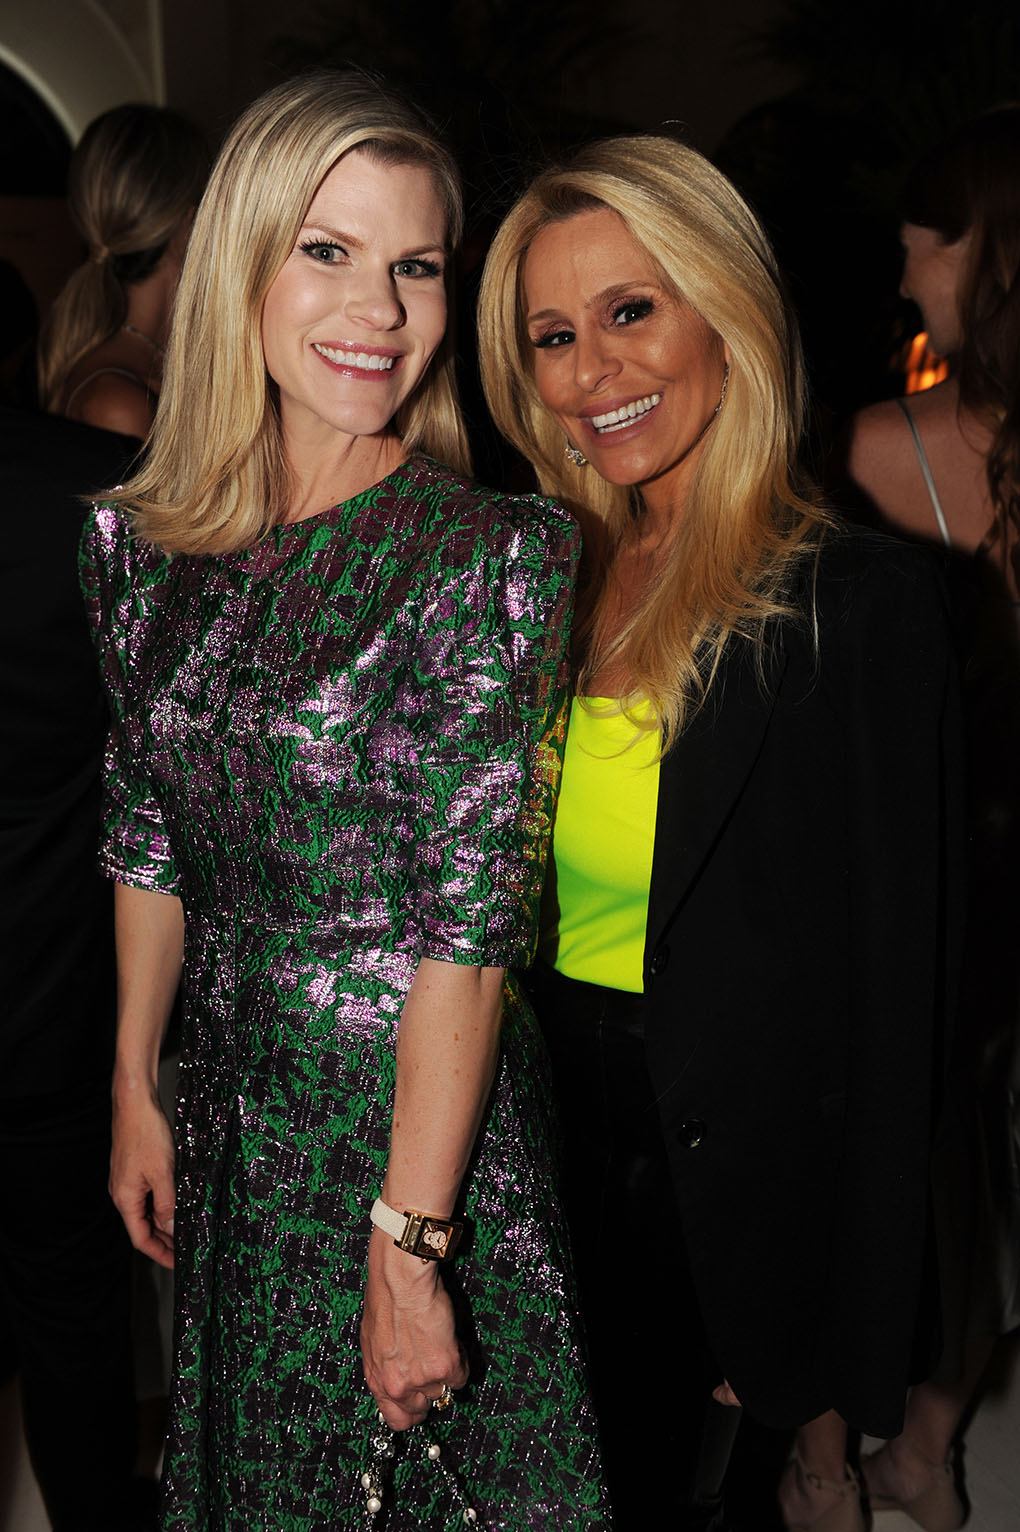 Suzy Buckley Woodward & Maya Ezratti at Le Sirenuse Miami for De Beers Bal Harbour boutique opening celebration